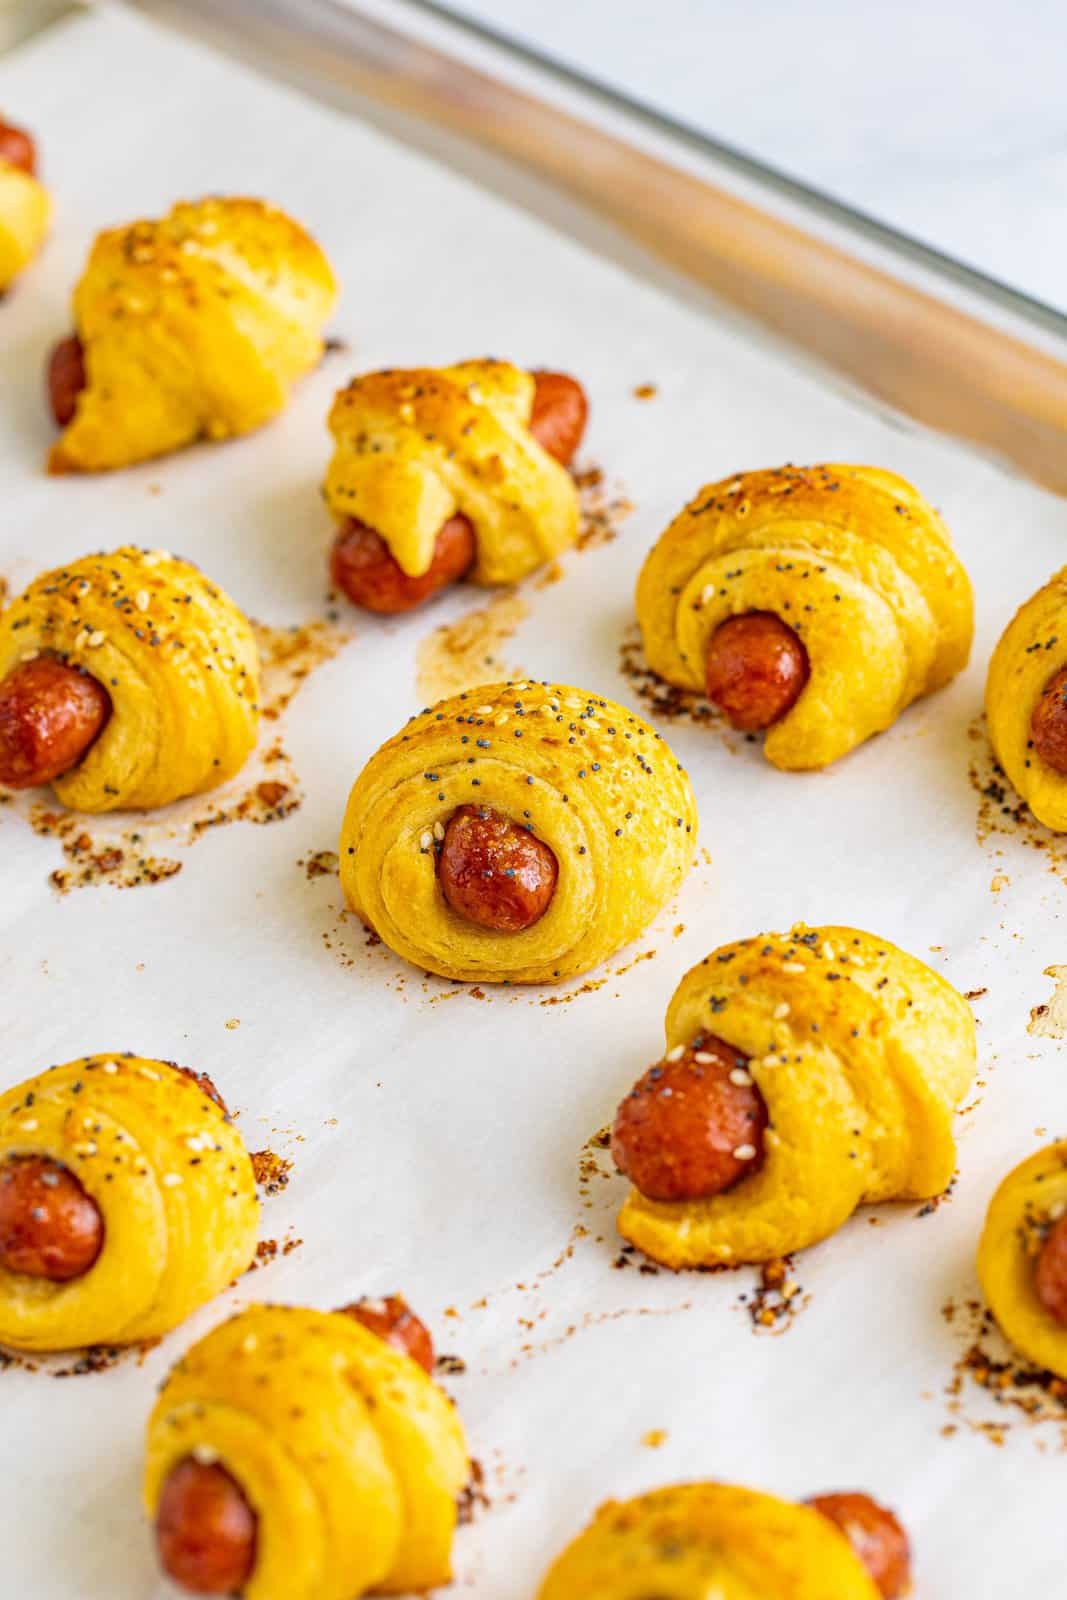 Finished Pigs in a Blanket on baking sheet.